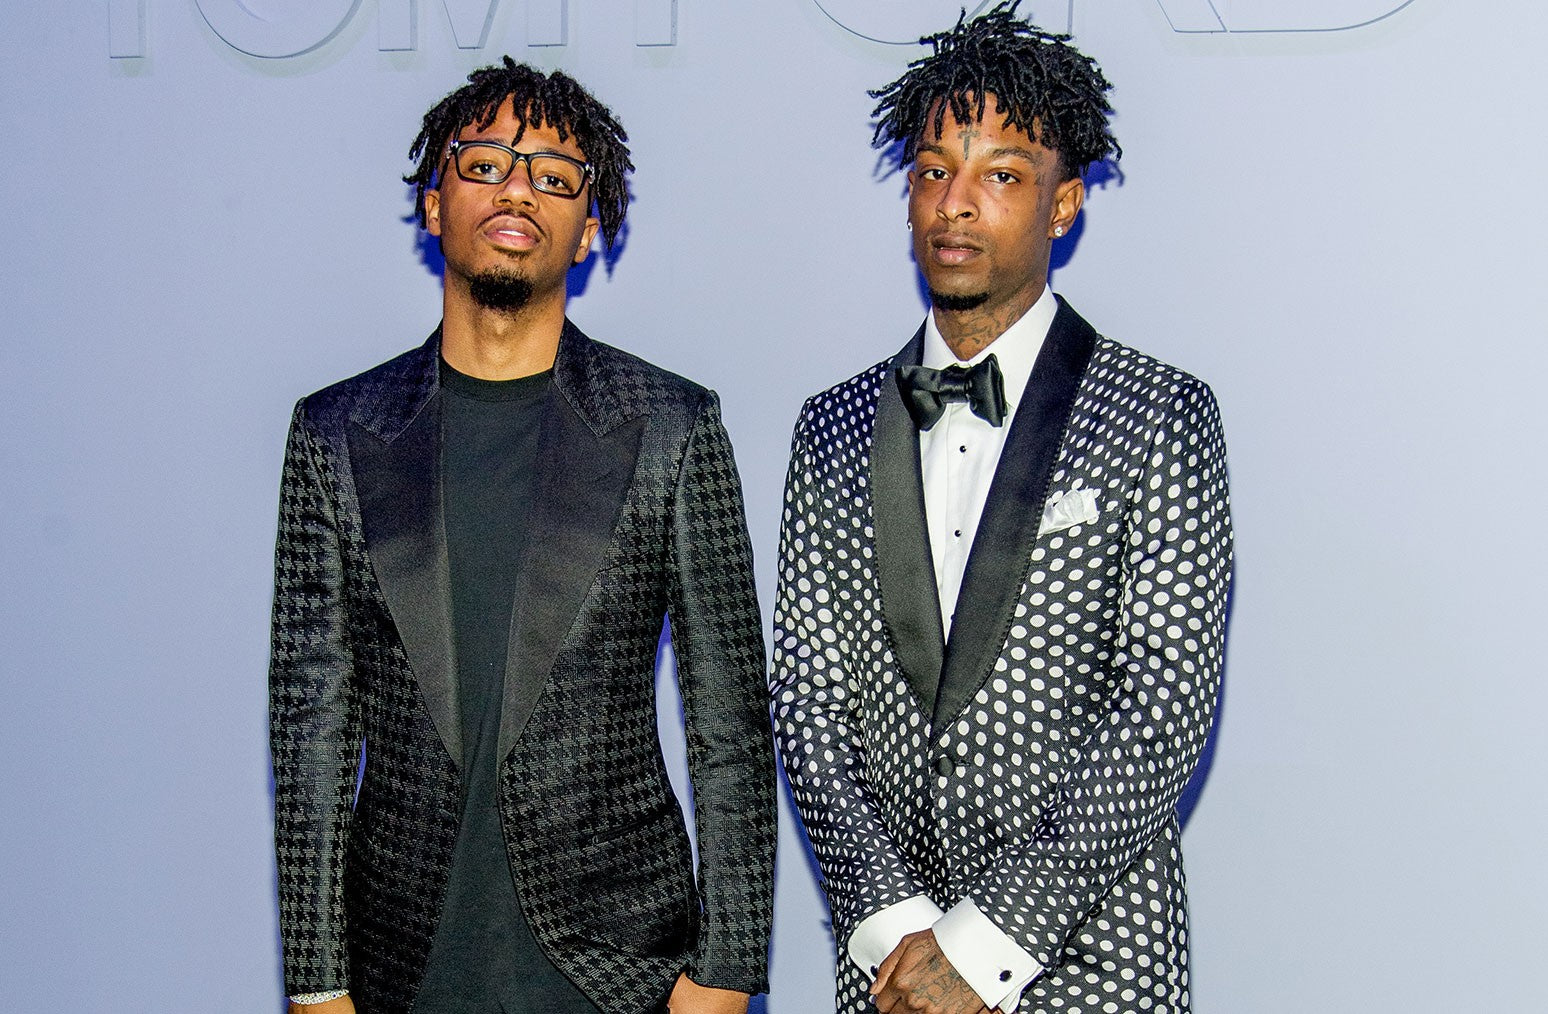 How “MANY MEN” by 21 Savage x Metro Boomin was made